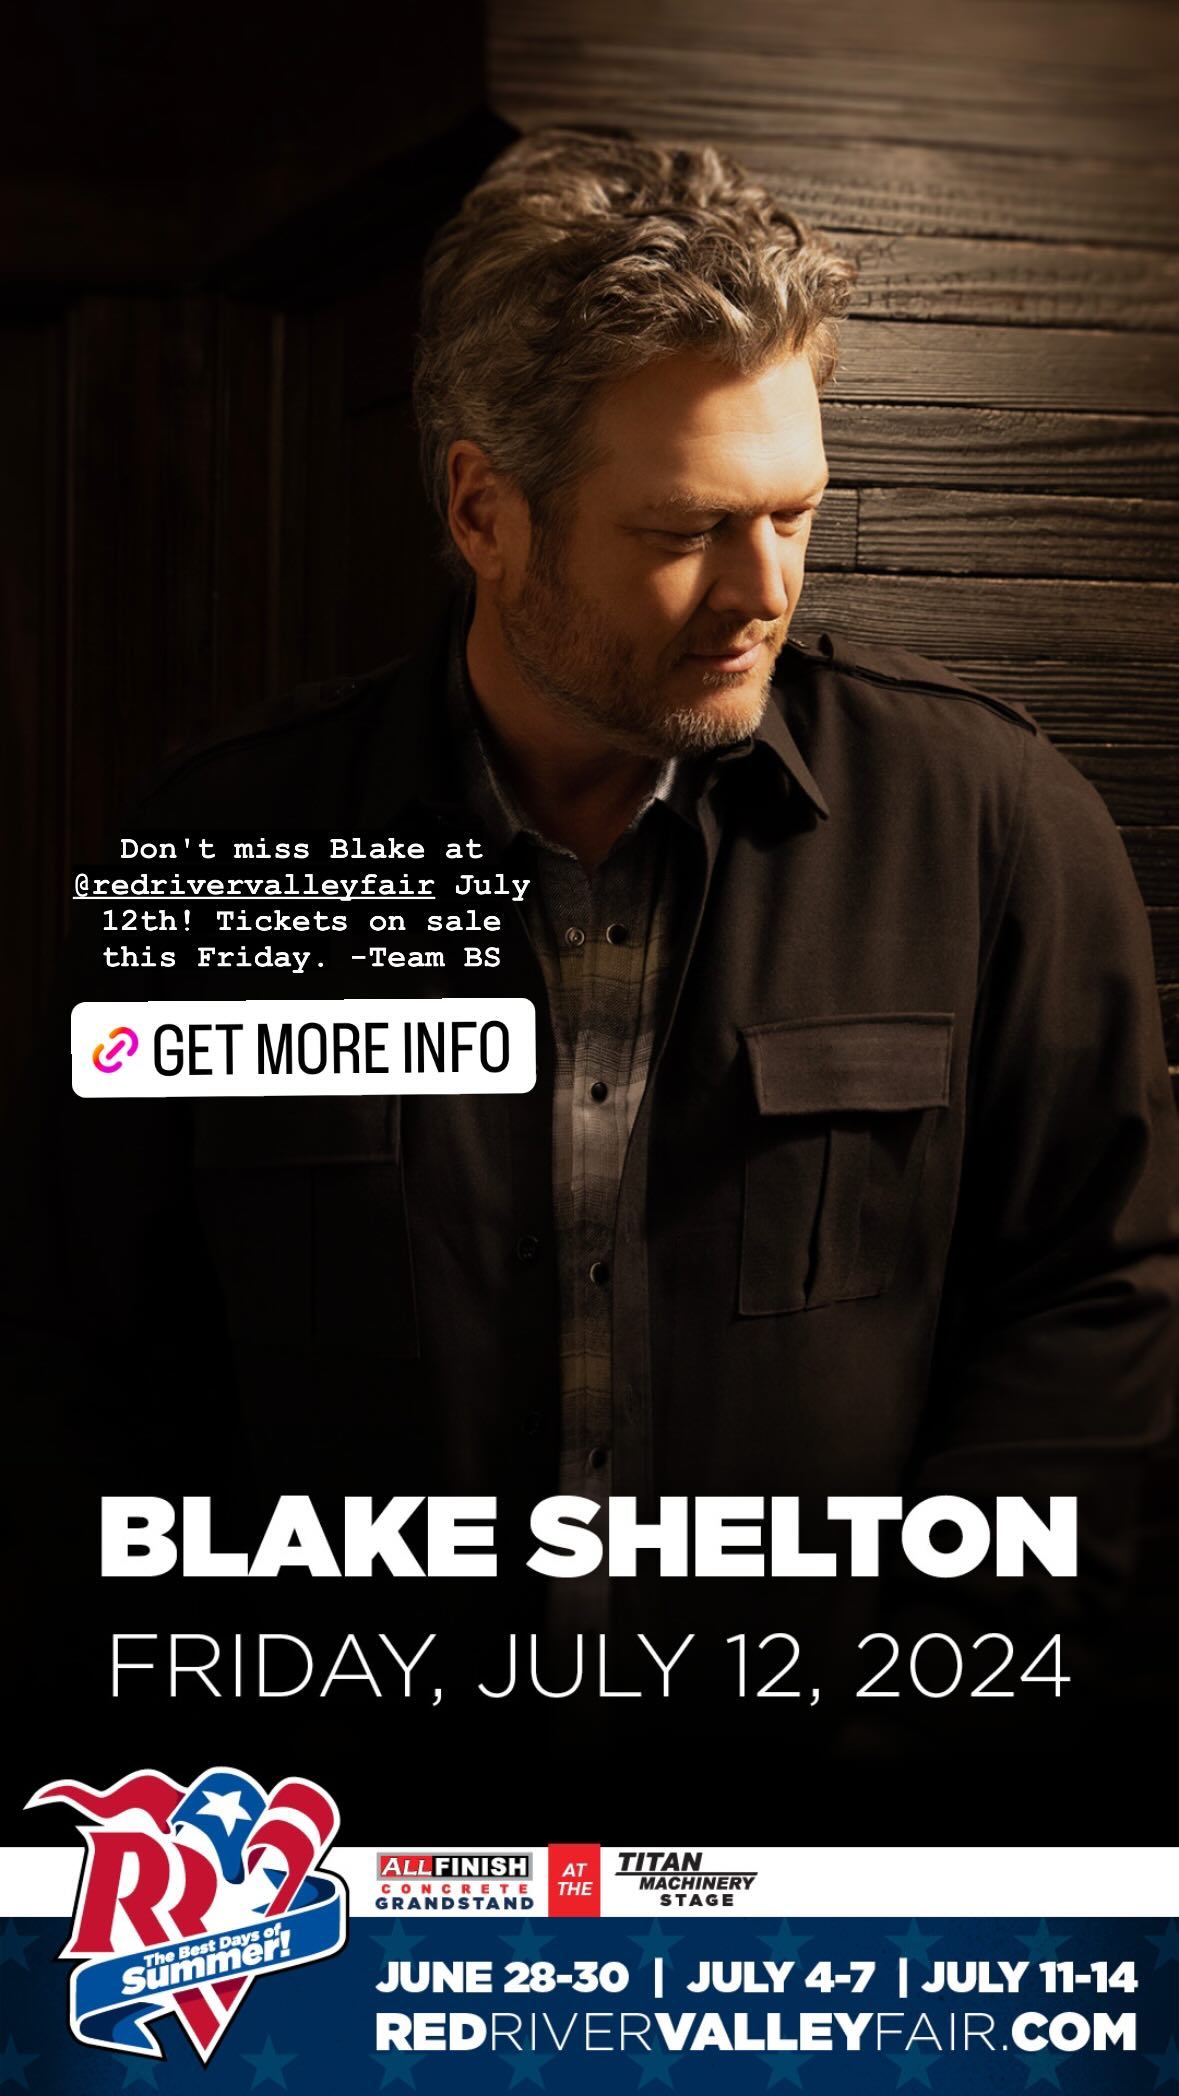 Blake advertised a new tour date